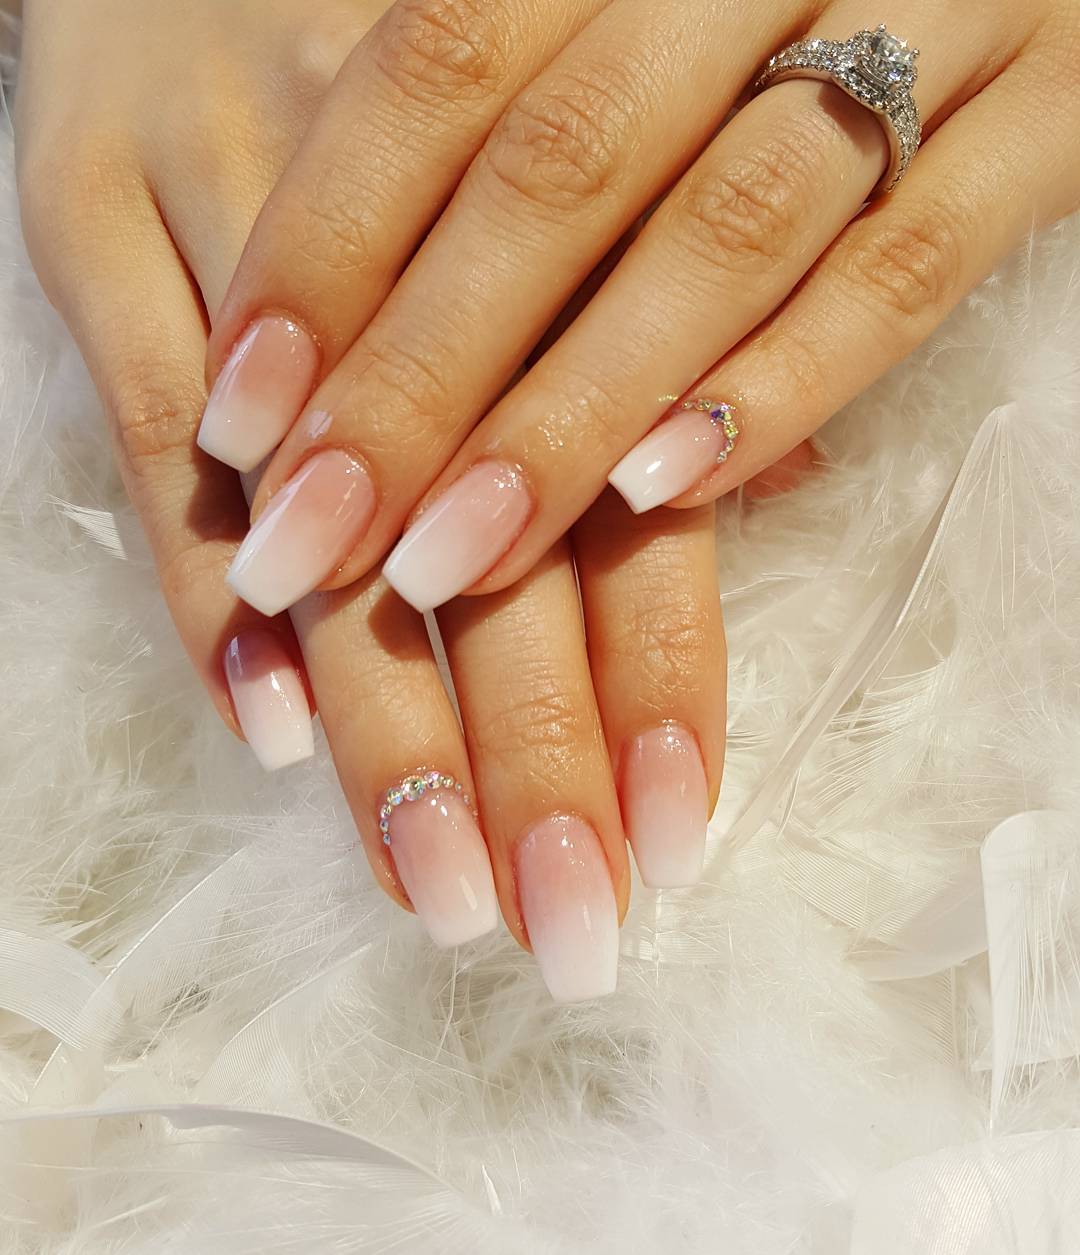 40 Manicure Inspiration Ideas with These Classy Nail Designs